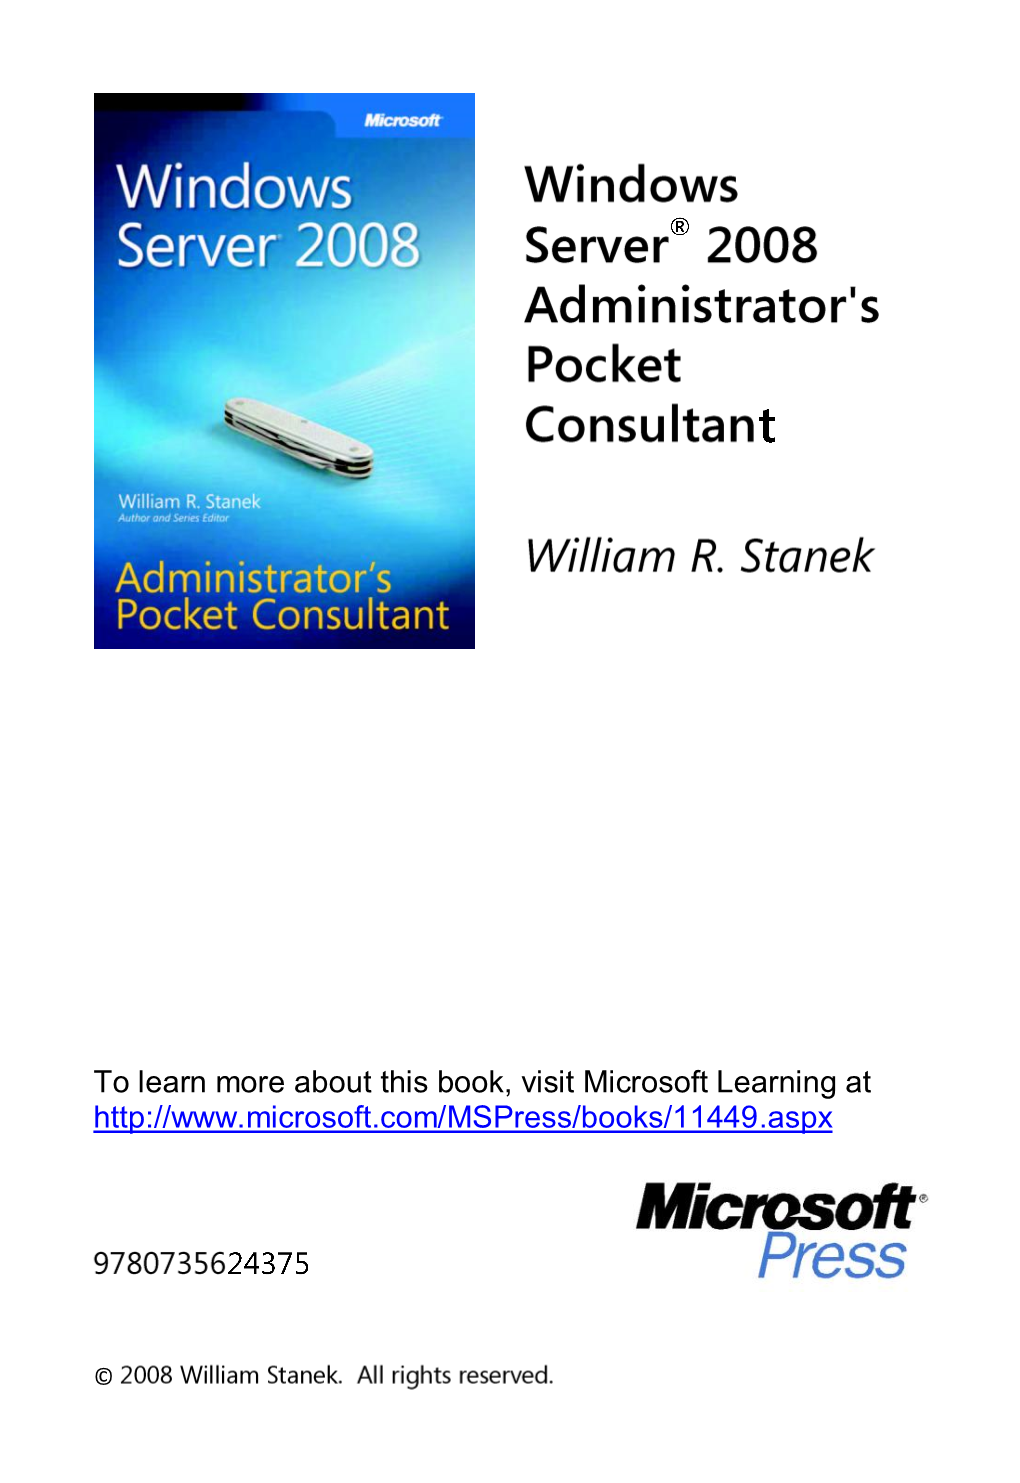 Sample Content from Windows Server 2008 Administrator's Pocket